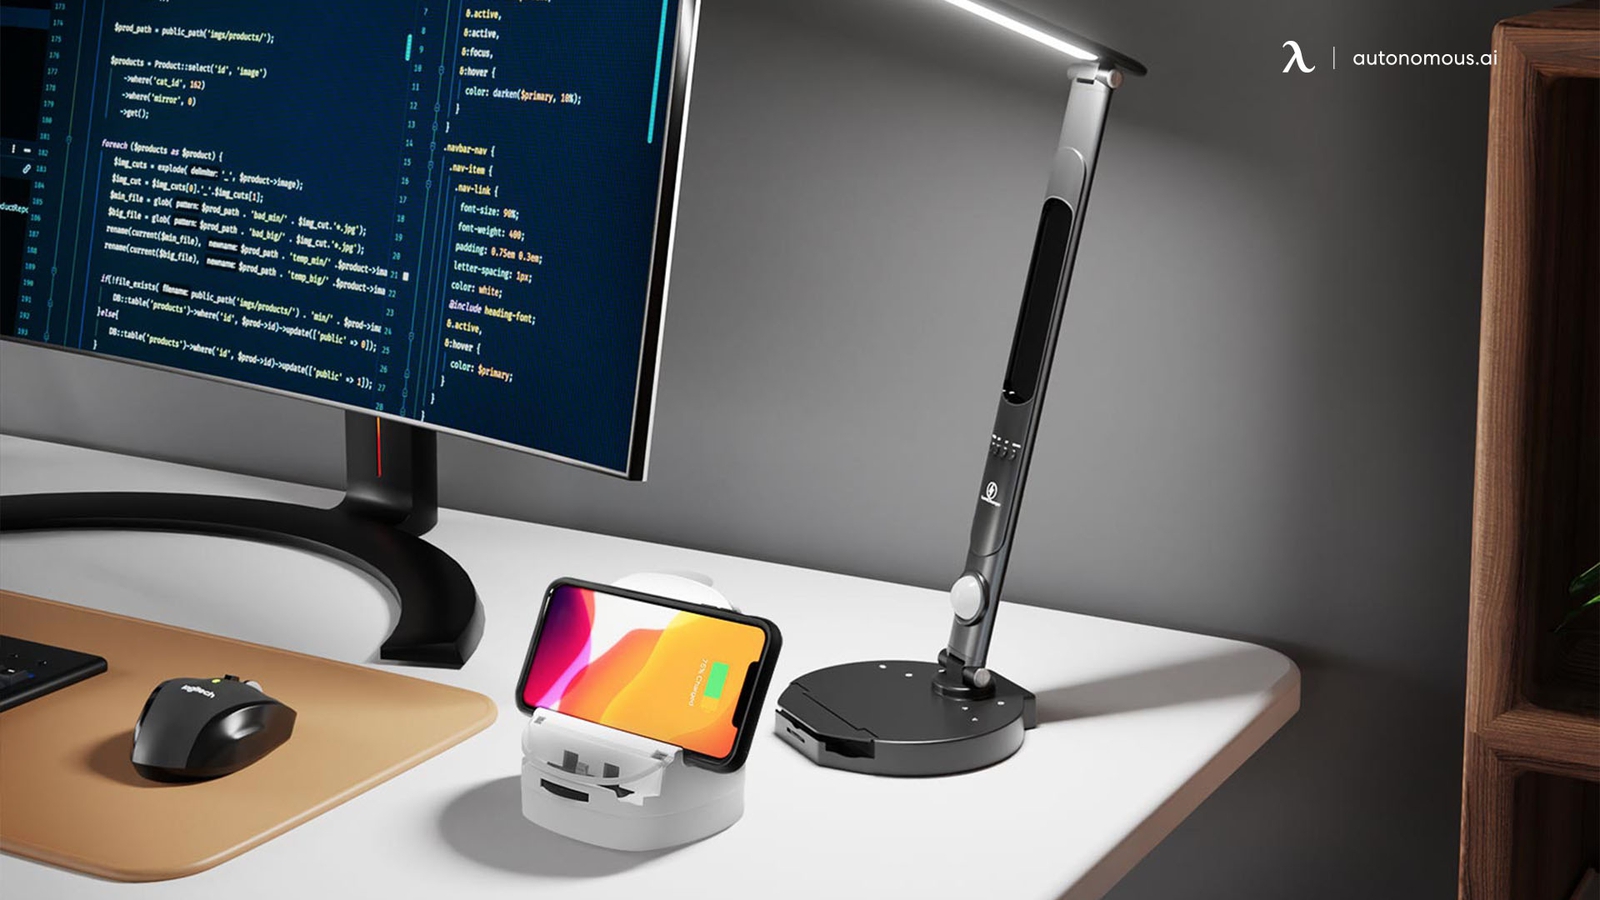 Is A Standing Desk With Wireless Charger Reliable?